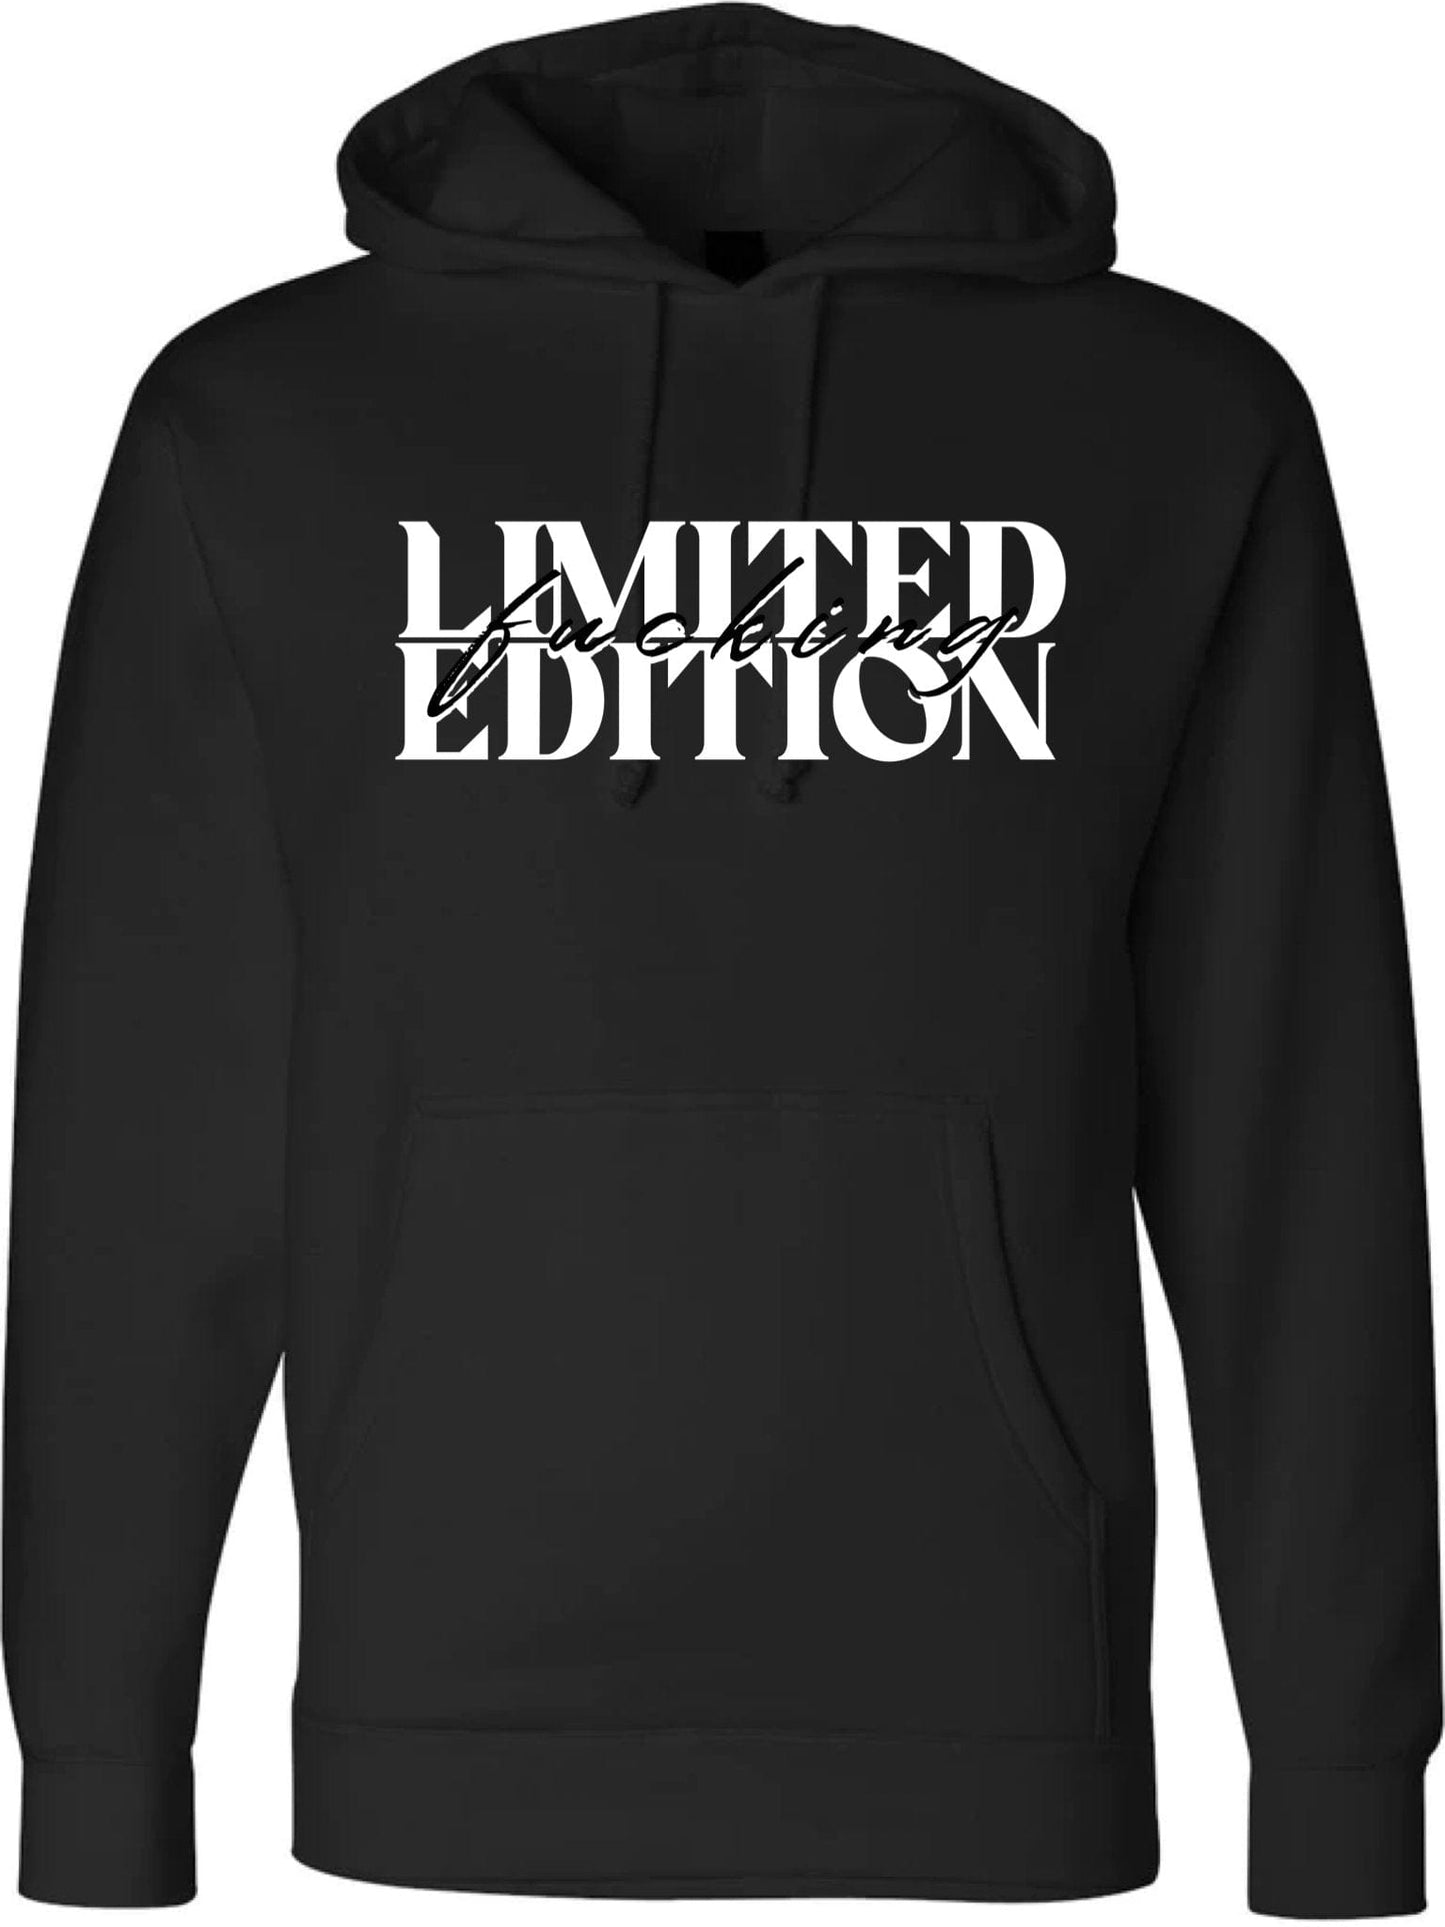 InsensitiviTees Shirts S / Black Limited Fucking Edition Hoodie